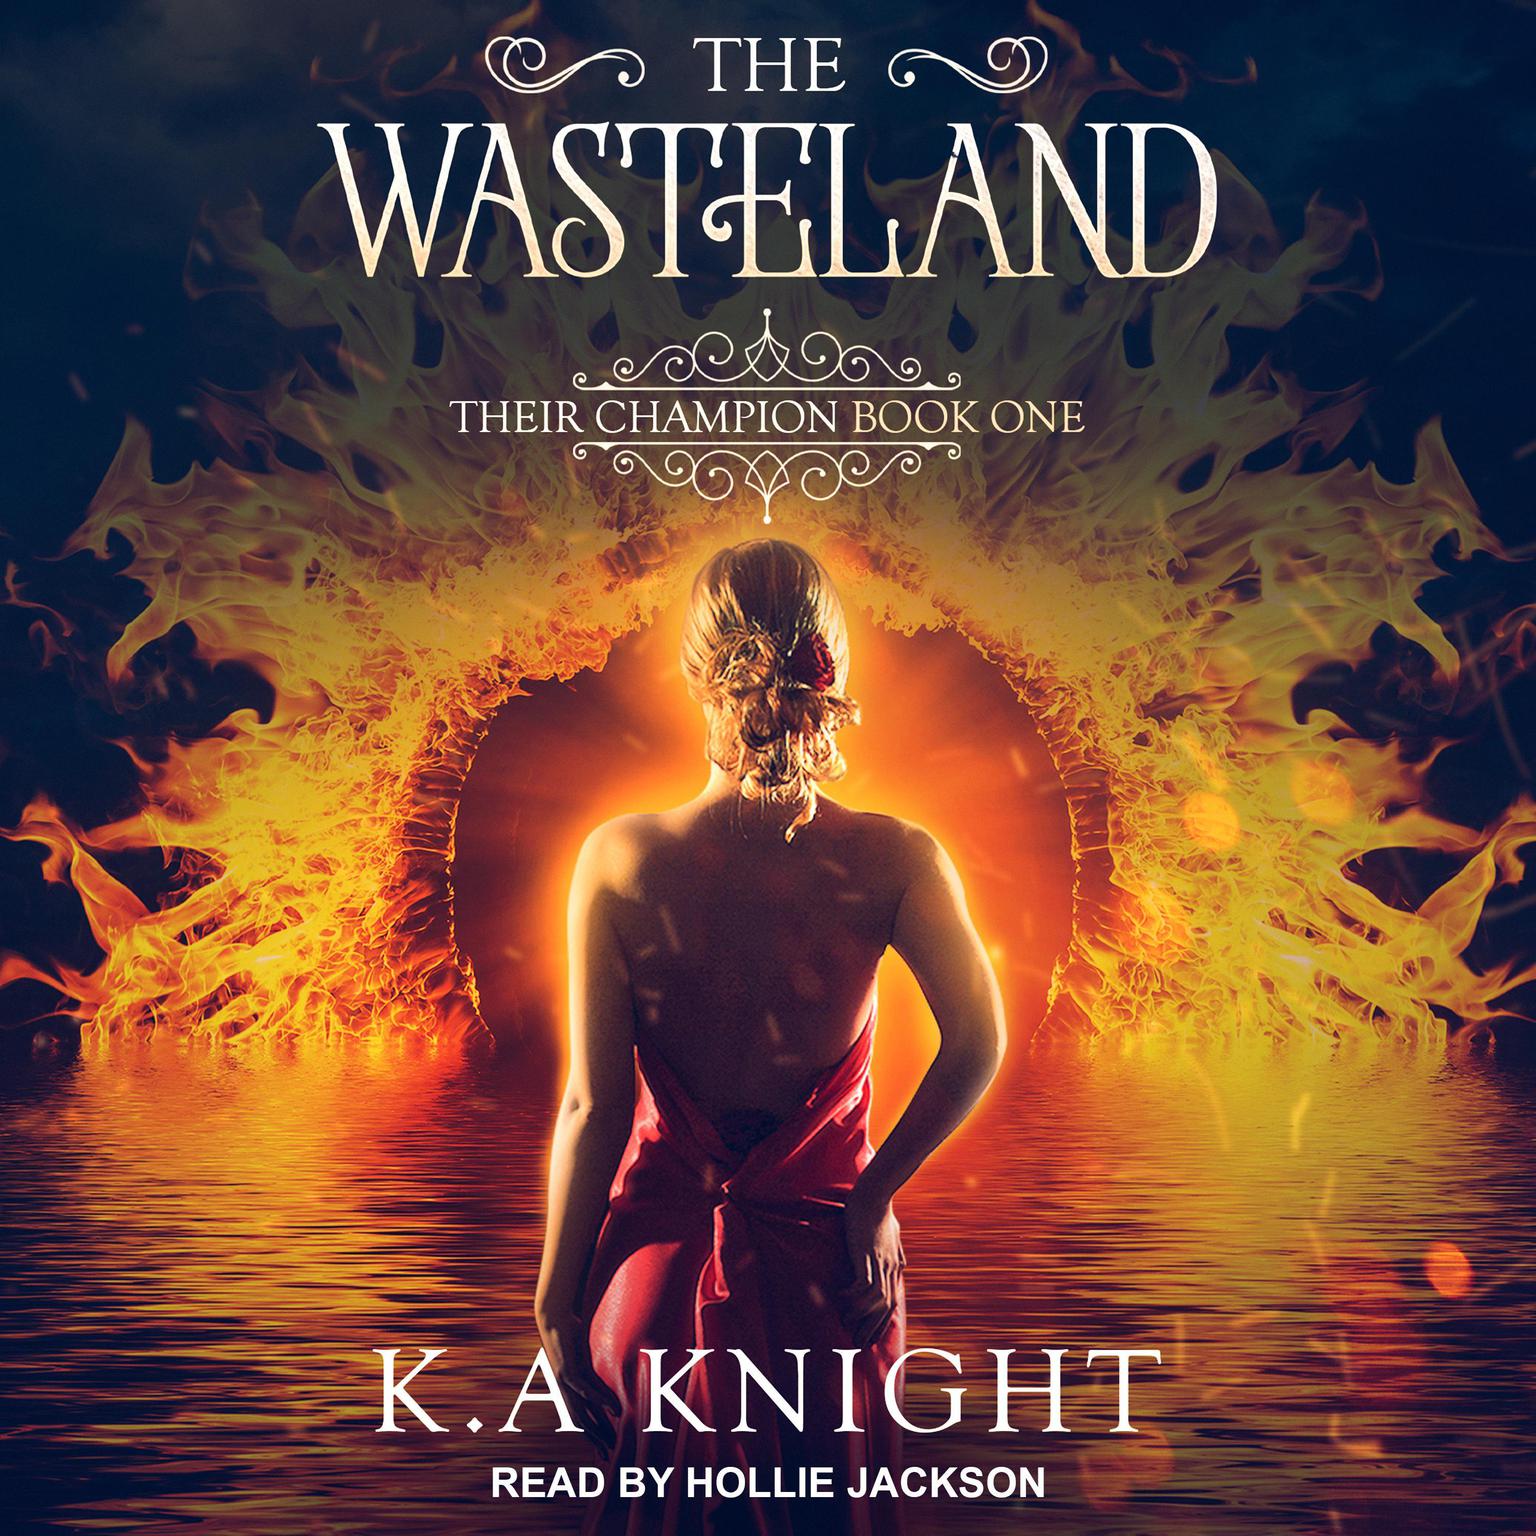 The Wasteland: Their Champion Book One Audiobook, by K.A. Knight